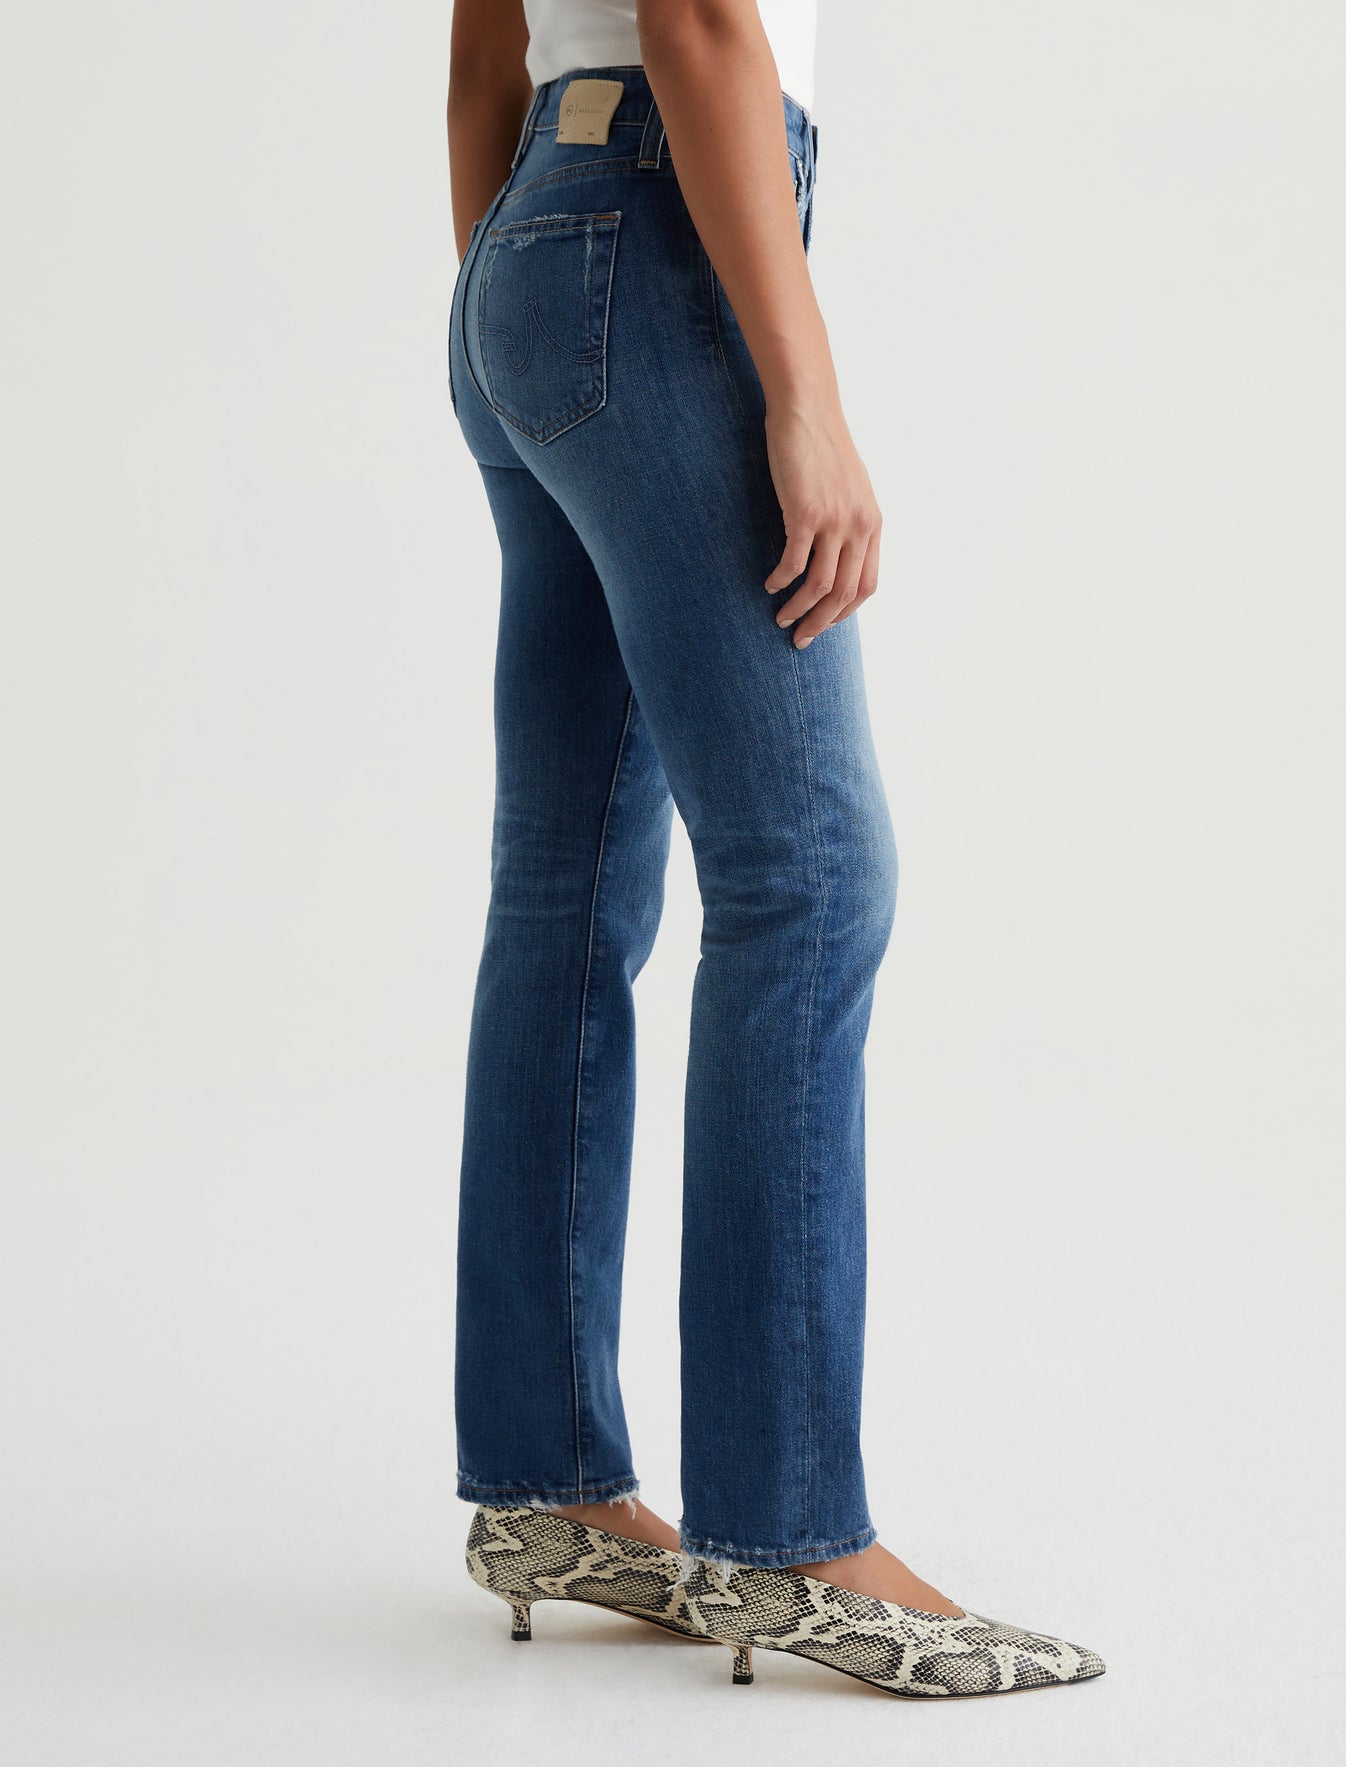 Metaphor Store Years AG at Mari Women 14 Official Jeans